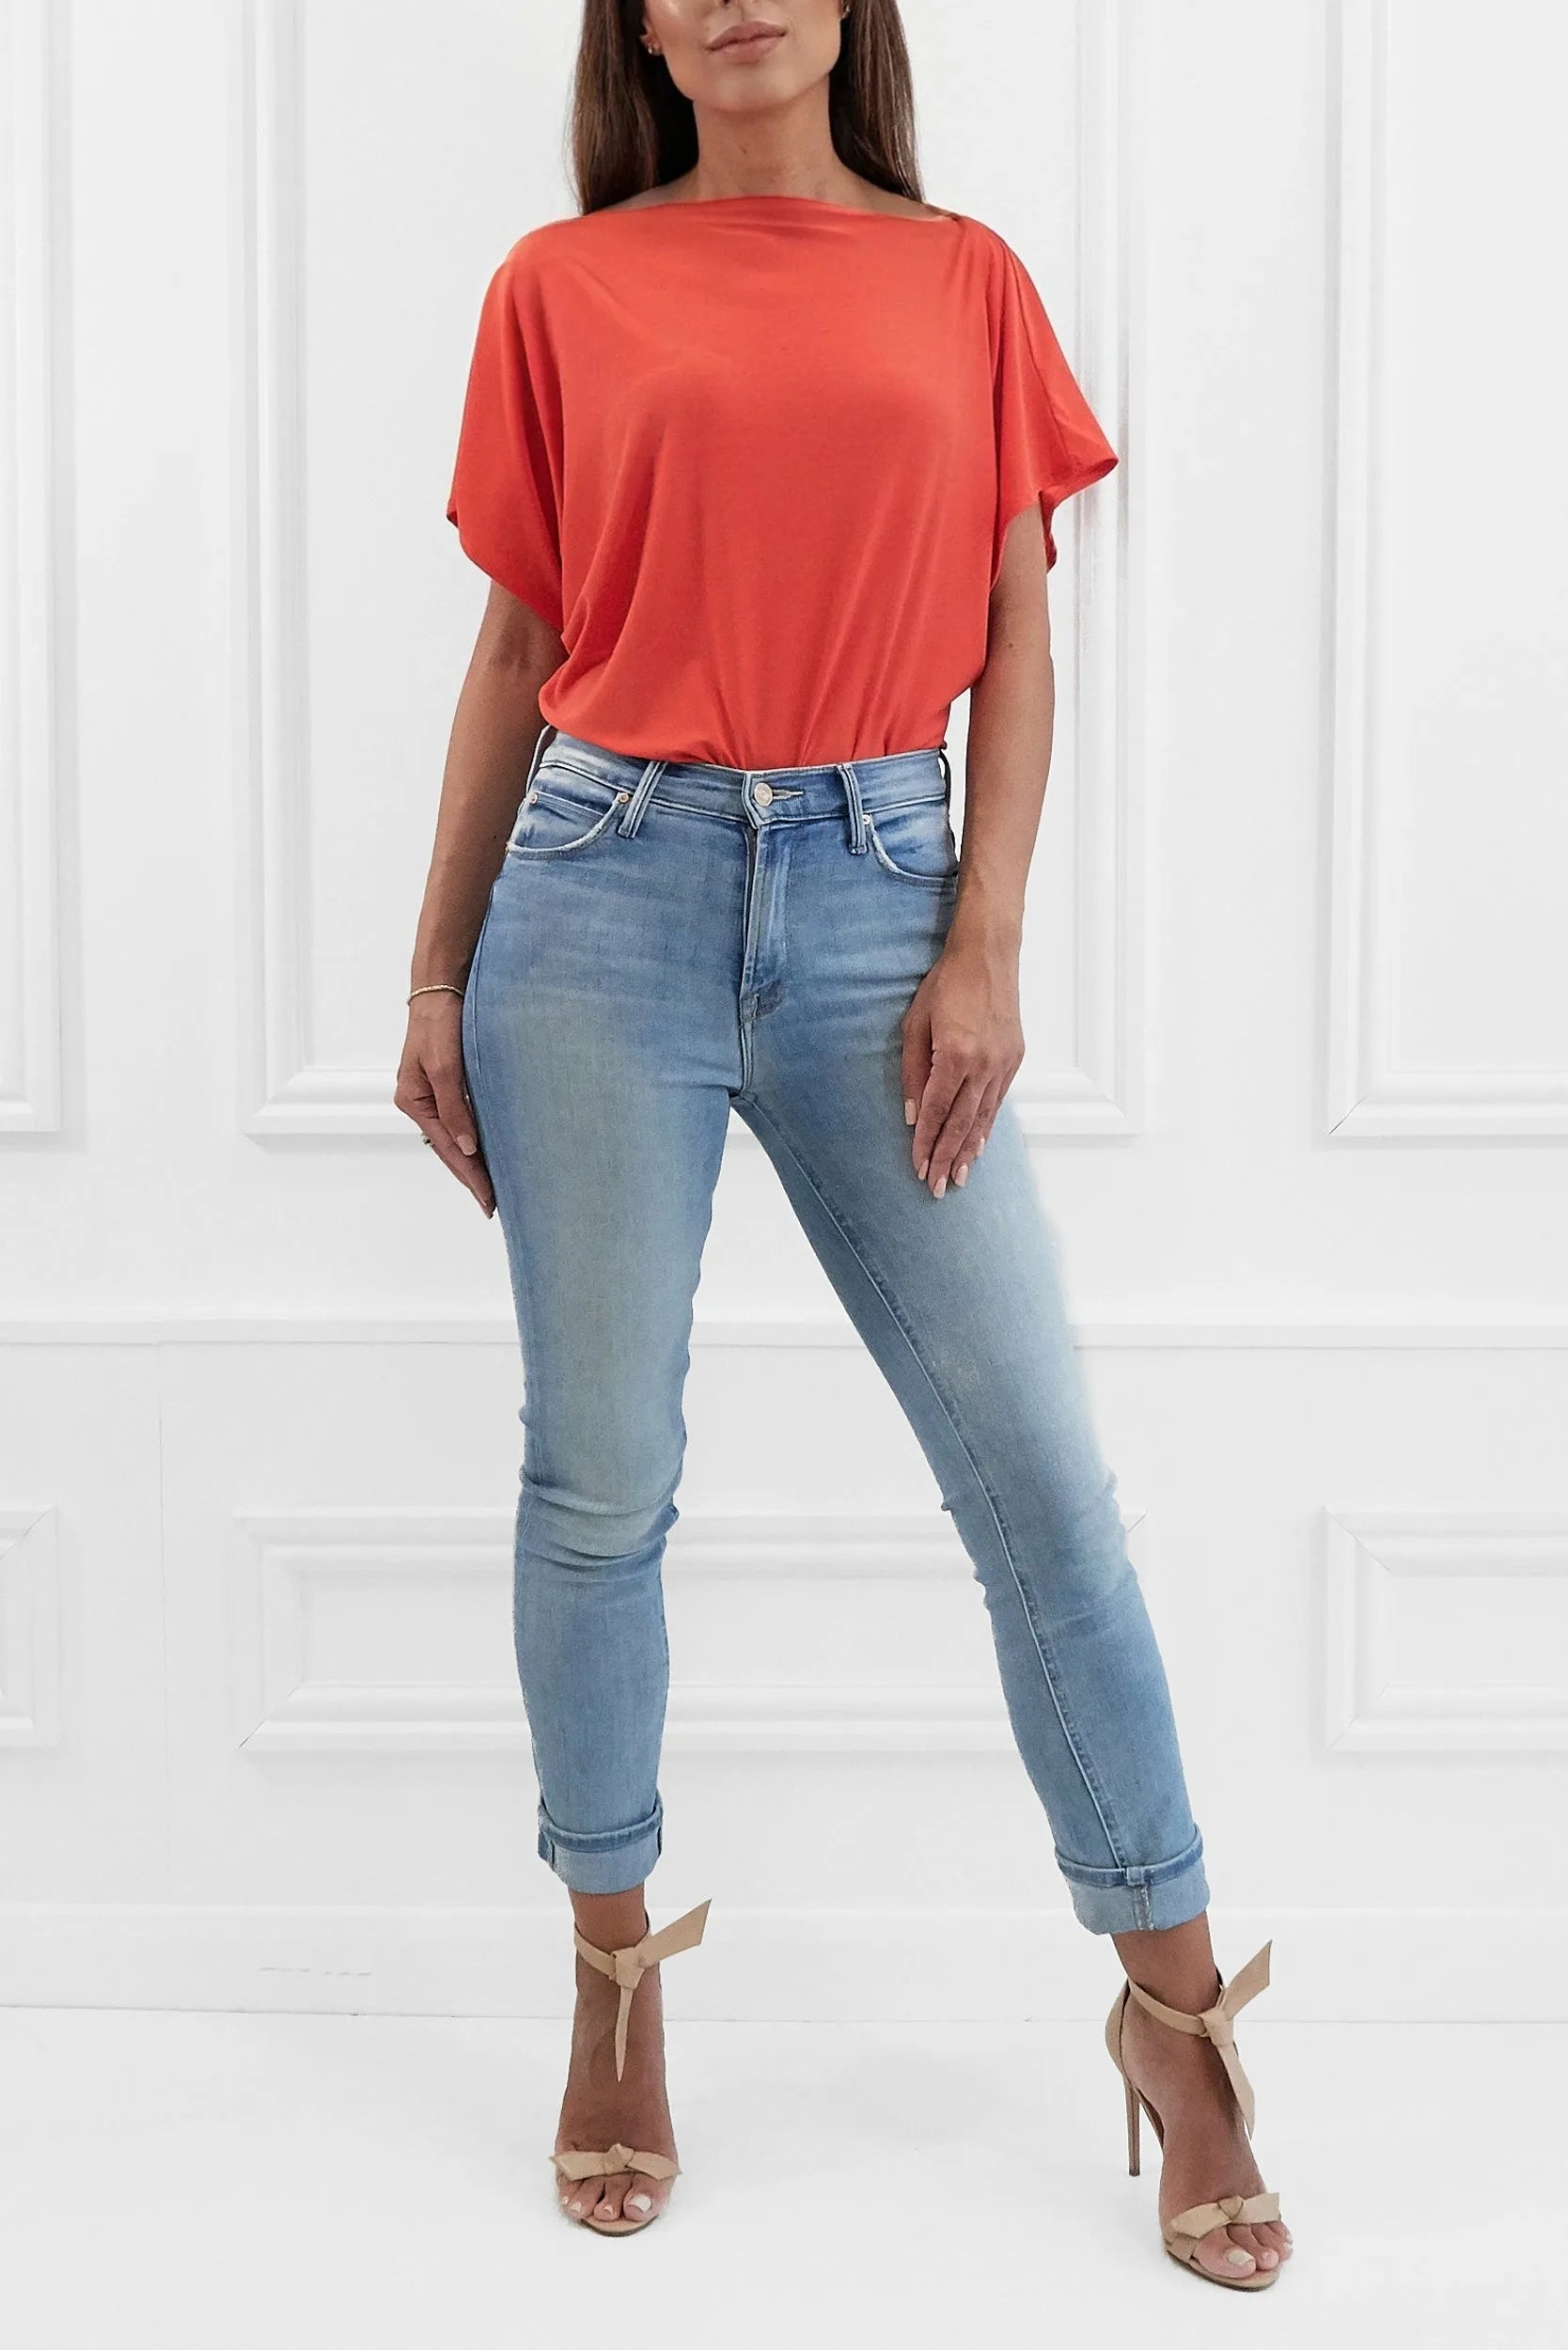 Honor Gold Finley Orange Batwing Top With Slashed Neckline